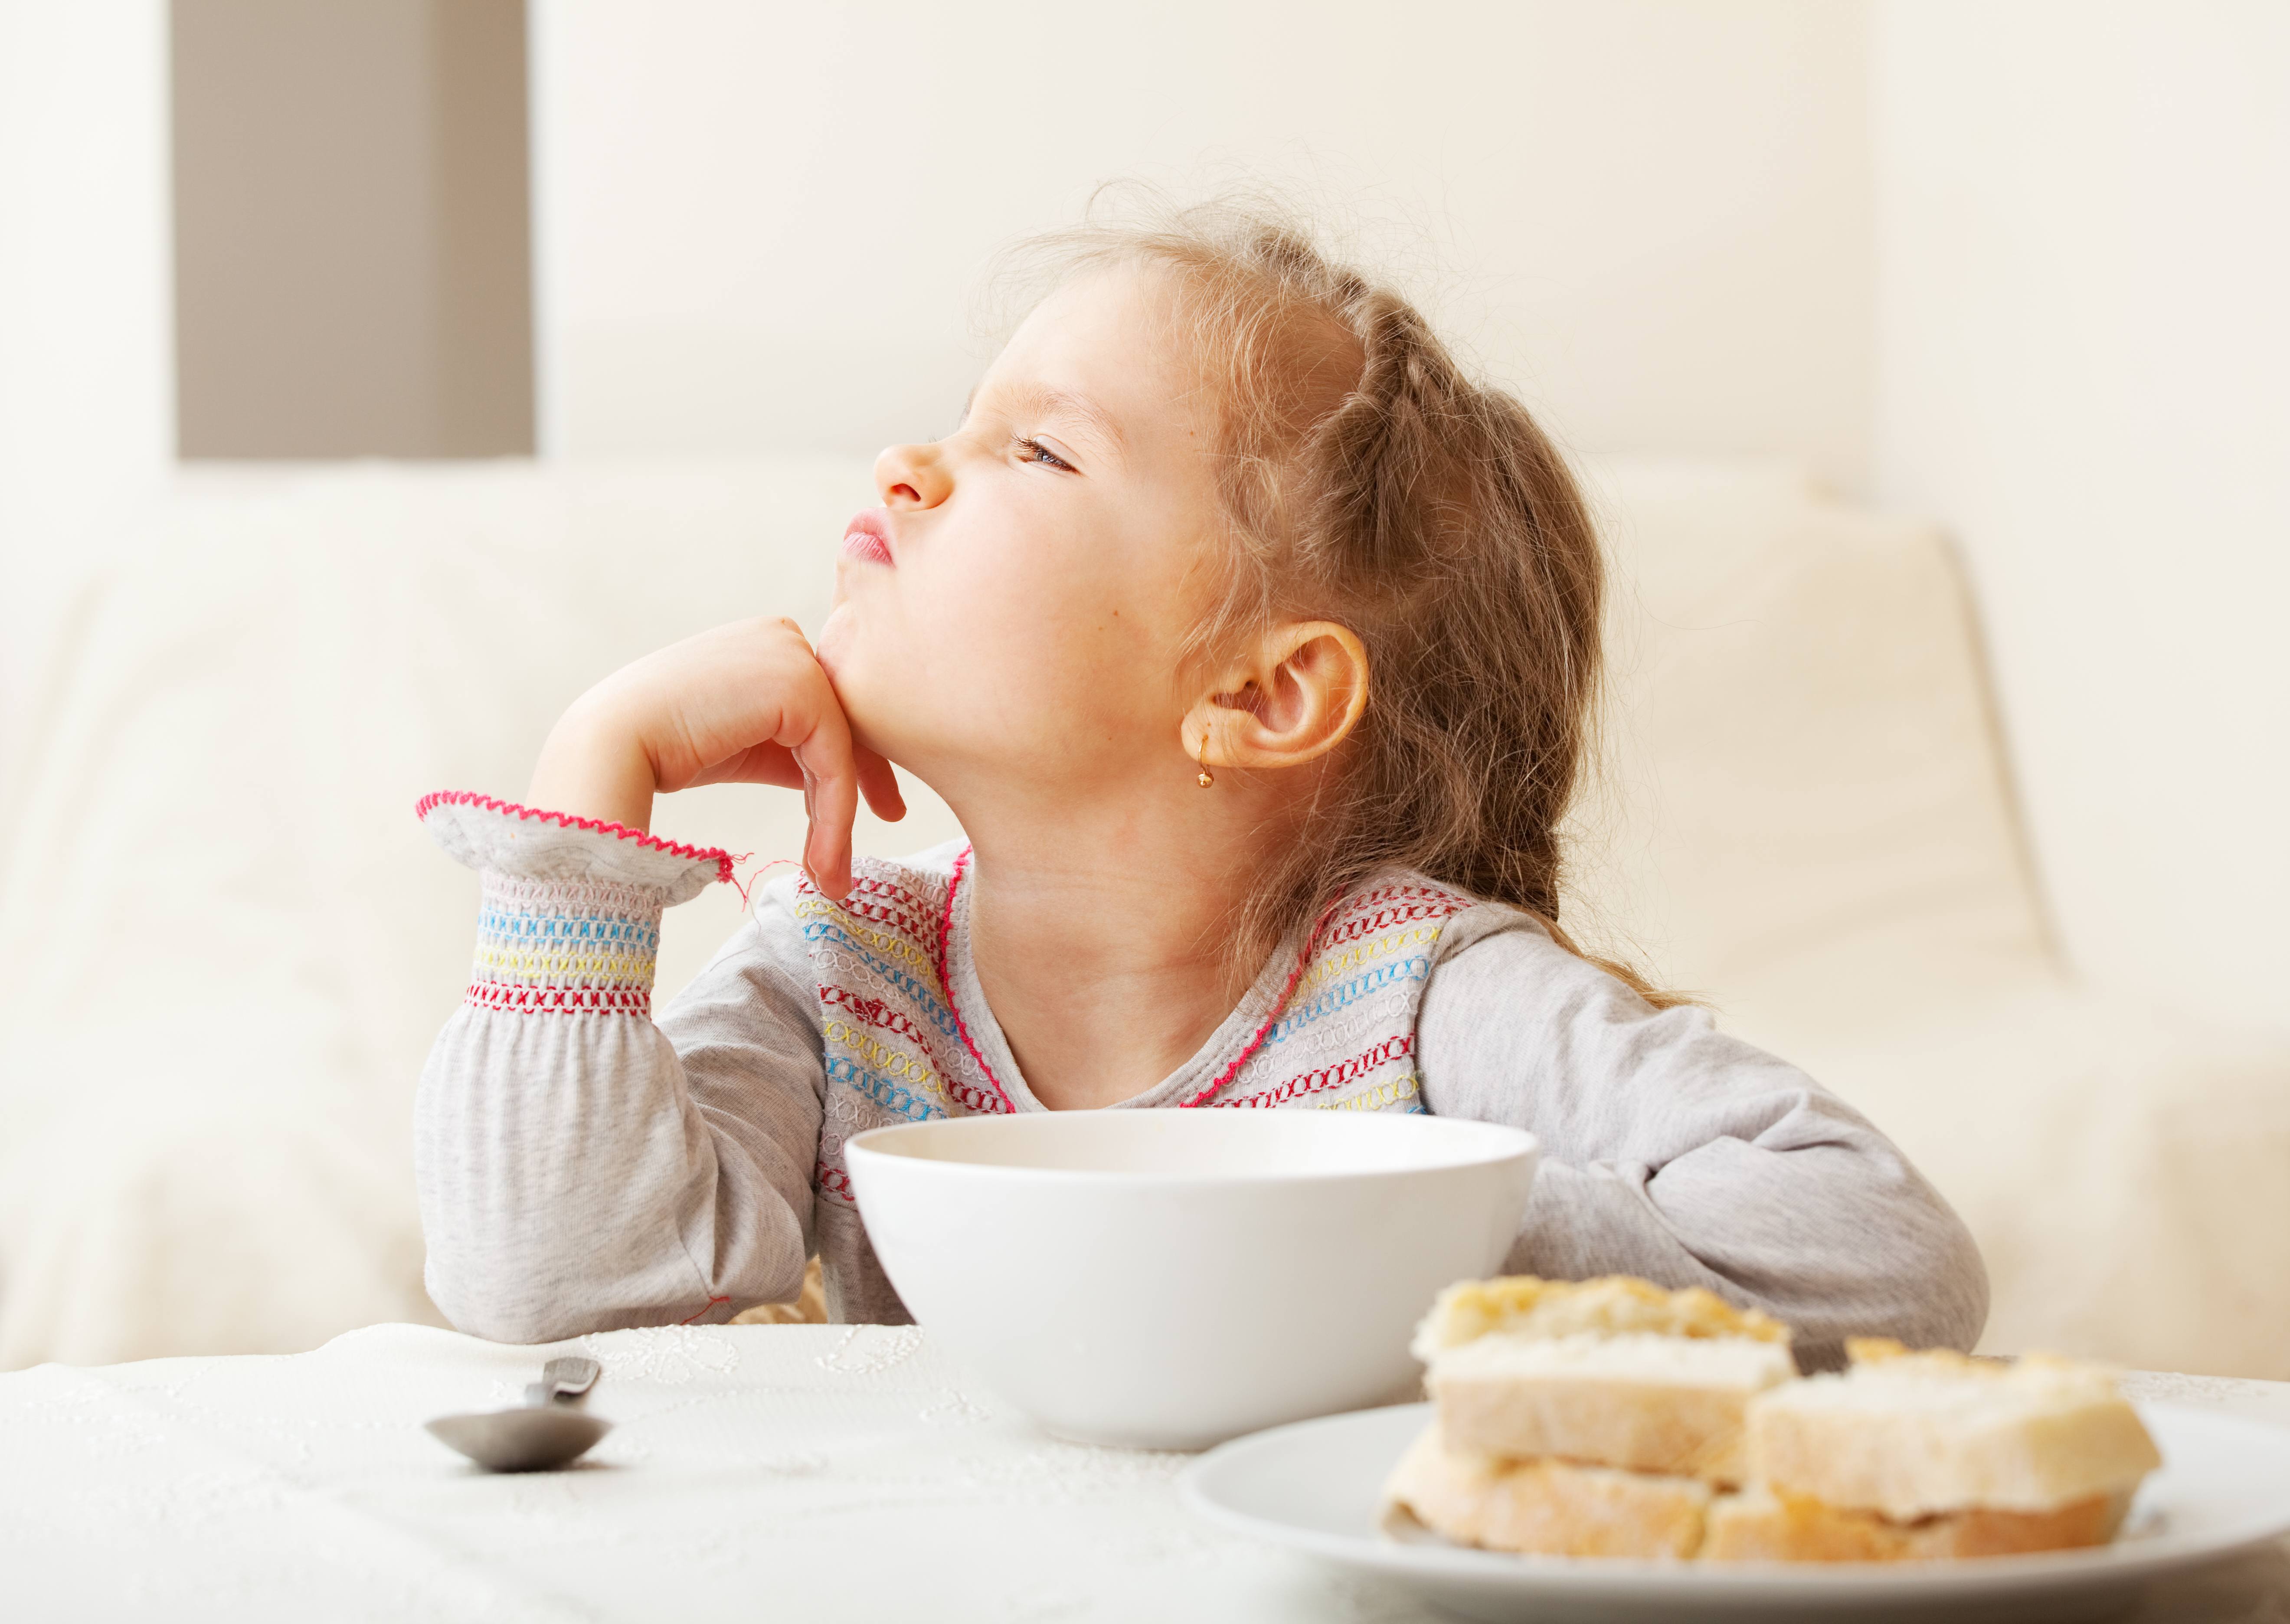 12 Tips for Curing Picky Eaters